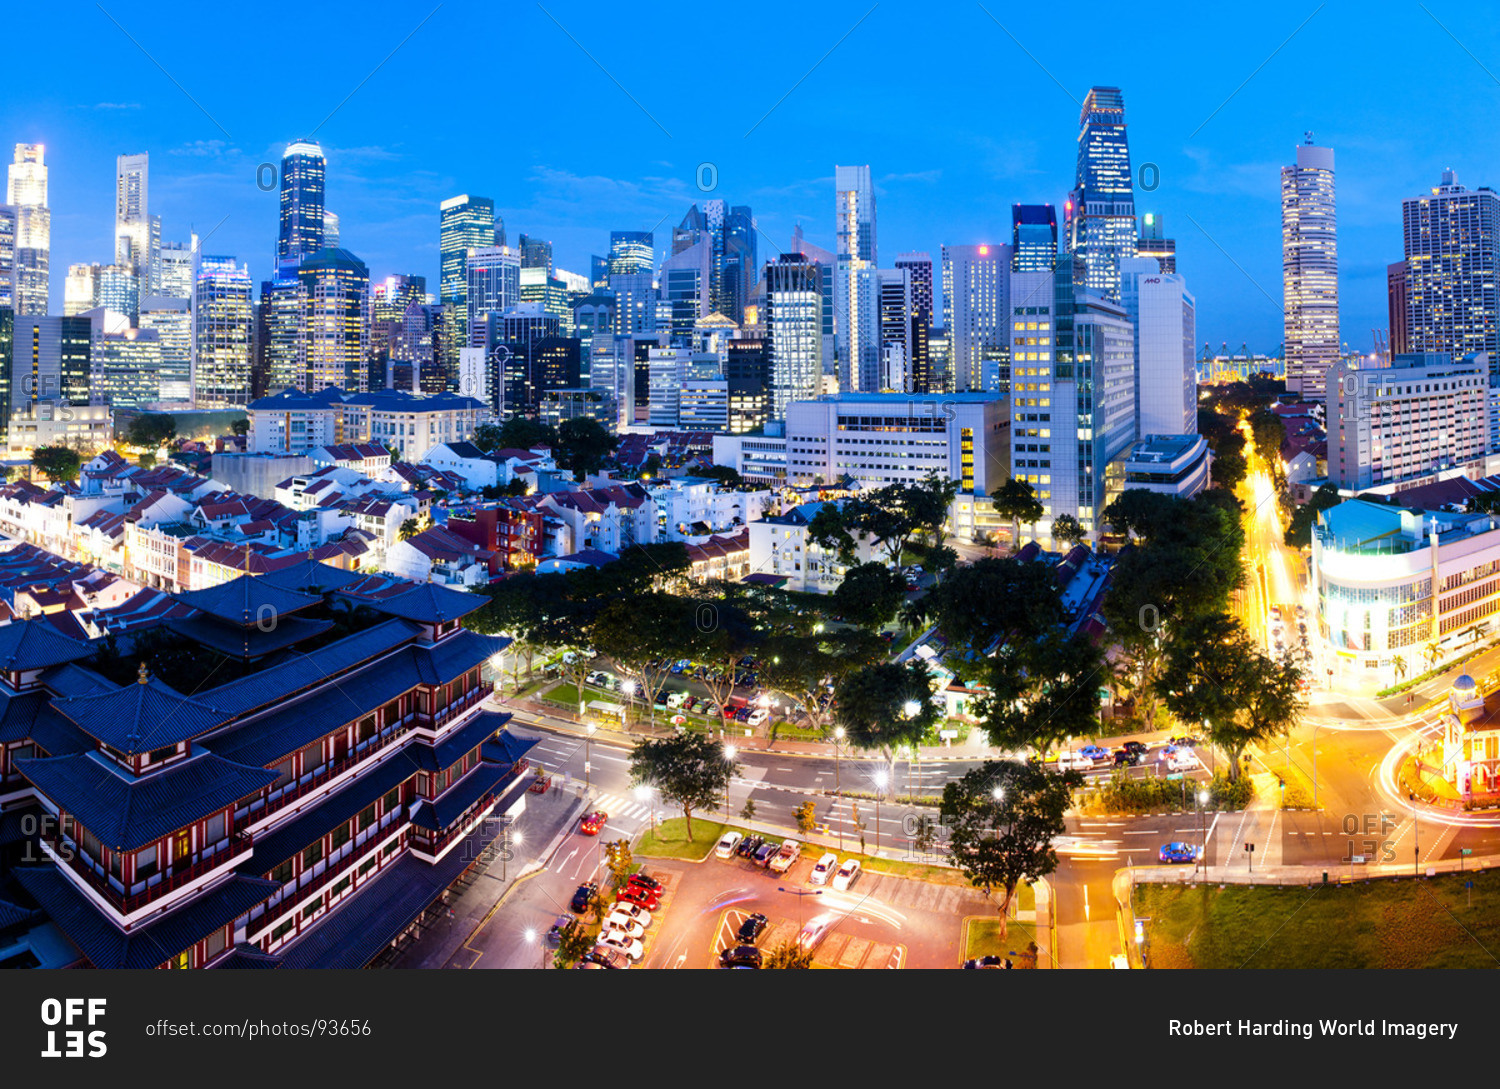 The Buddha Tooth Relic Temple and Central Business District (CBD), Chinatown, Singapore, Southeast Asia, Asia